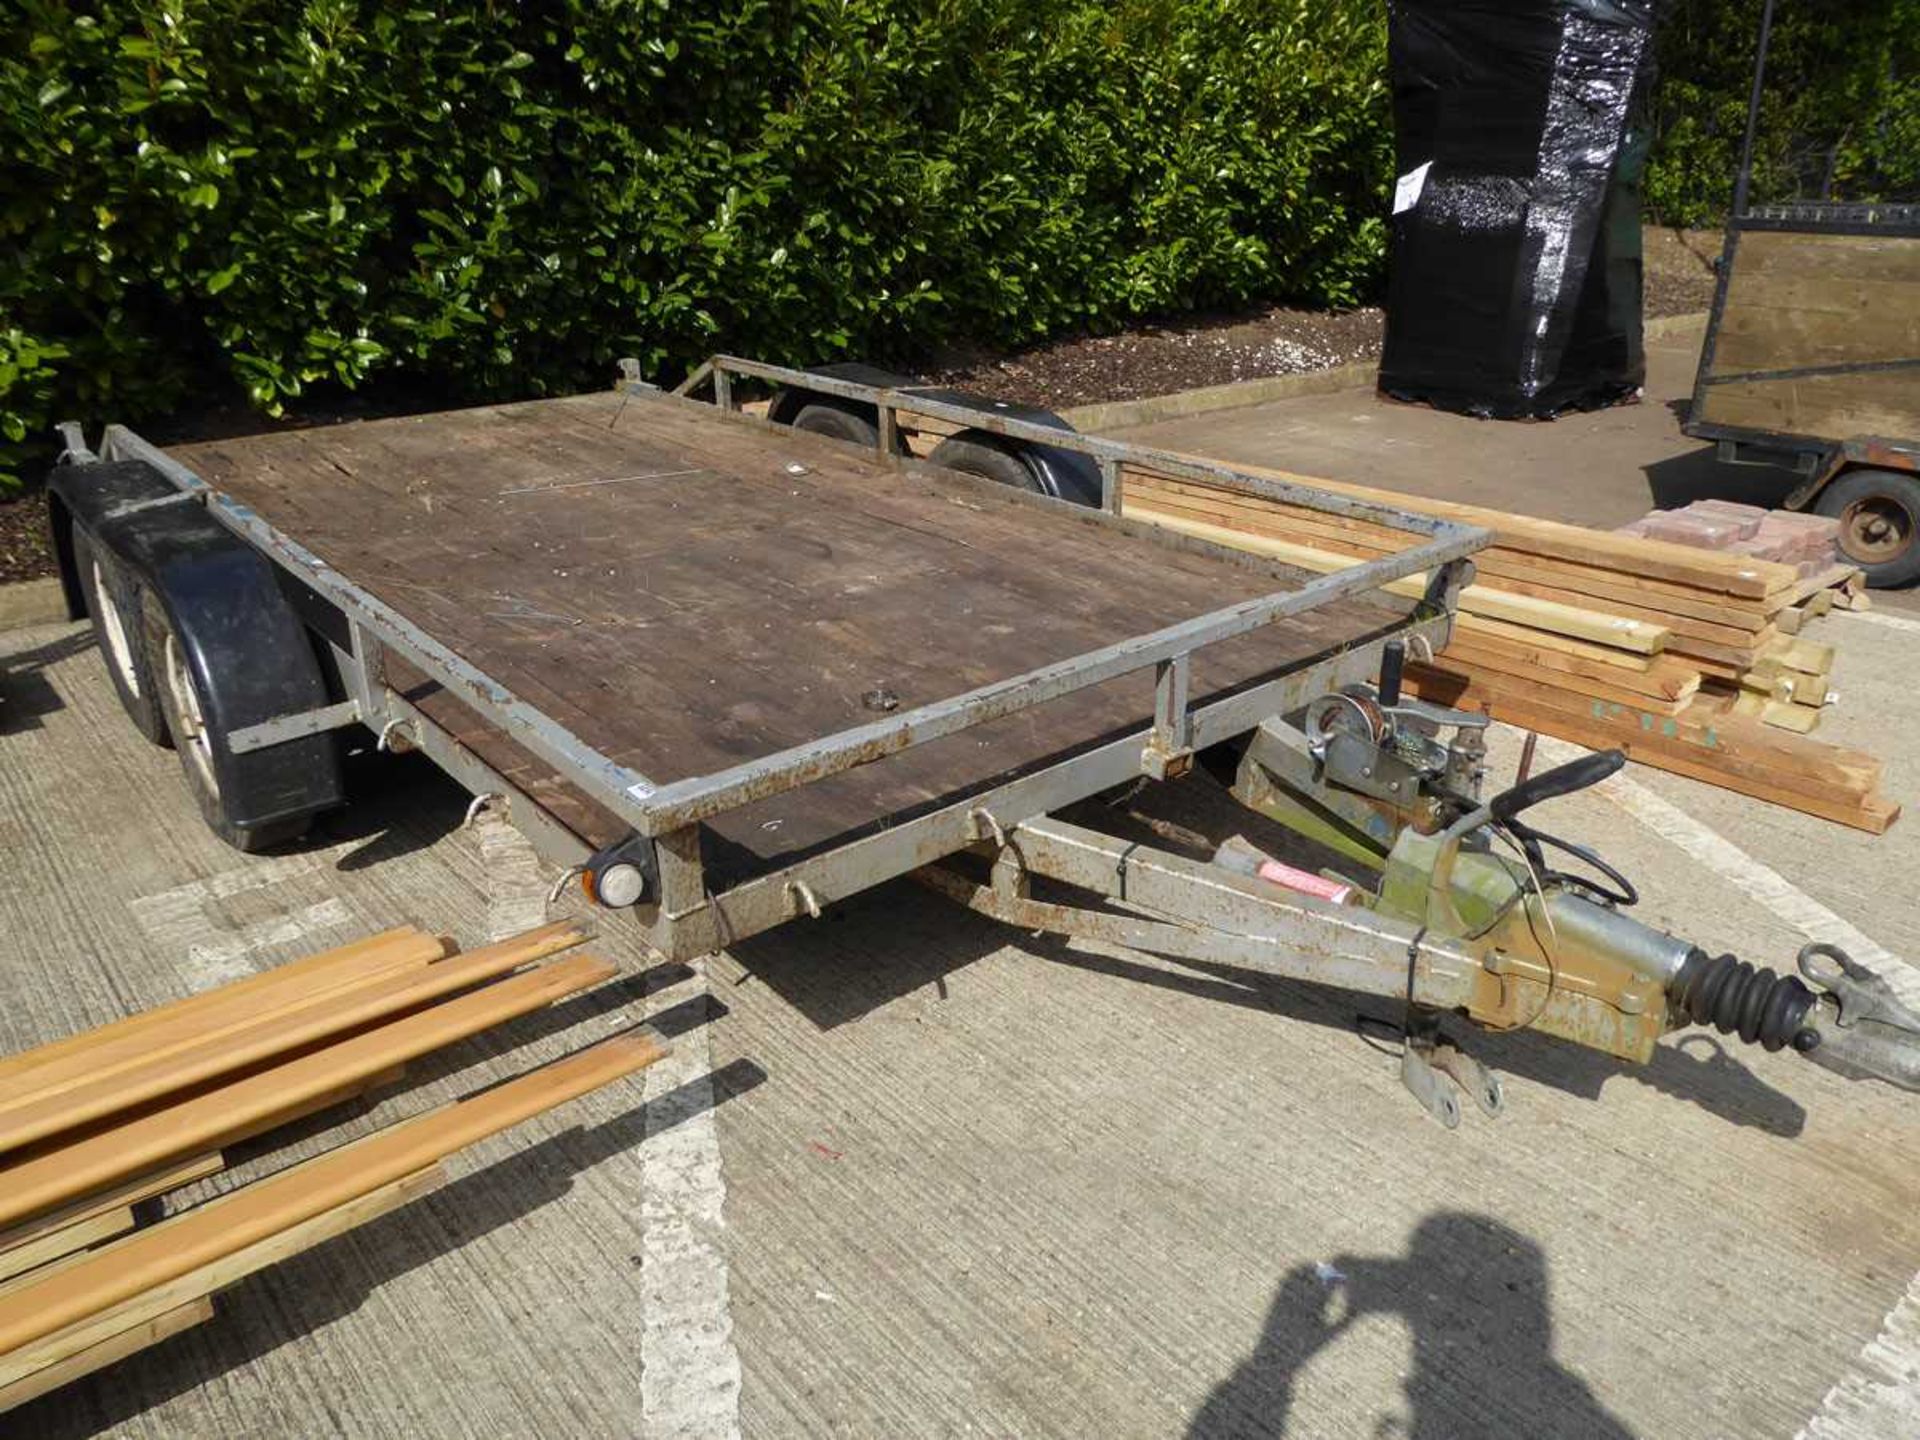 Double axle large car trailer with hand winch